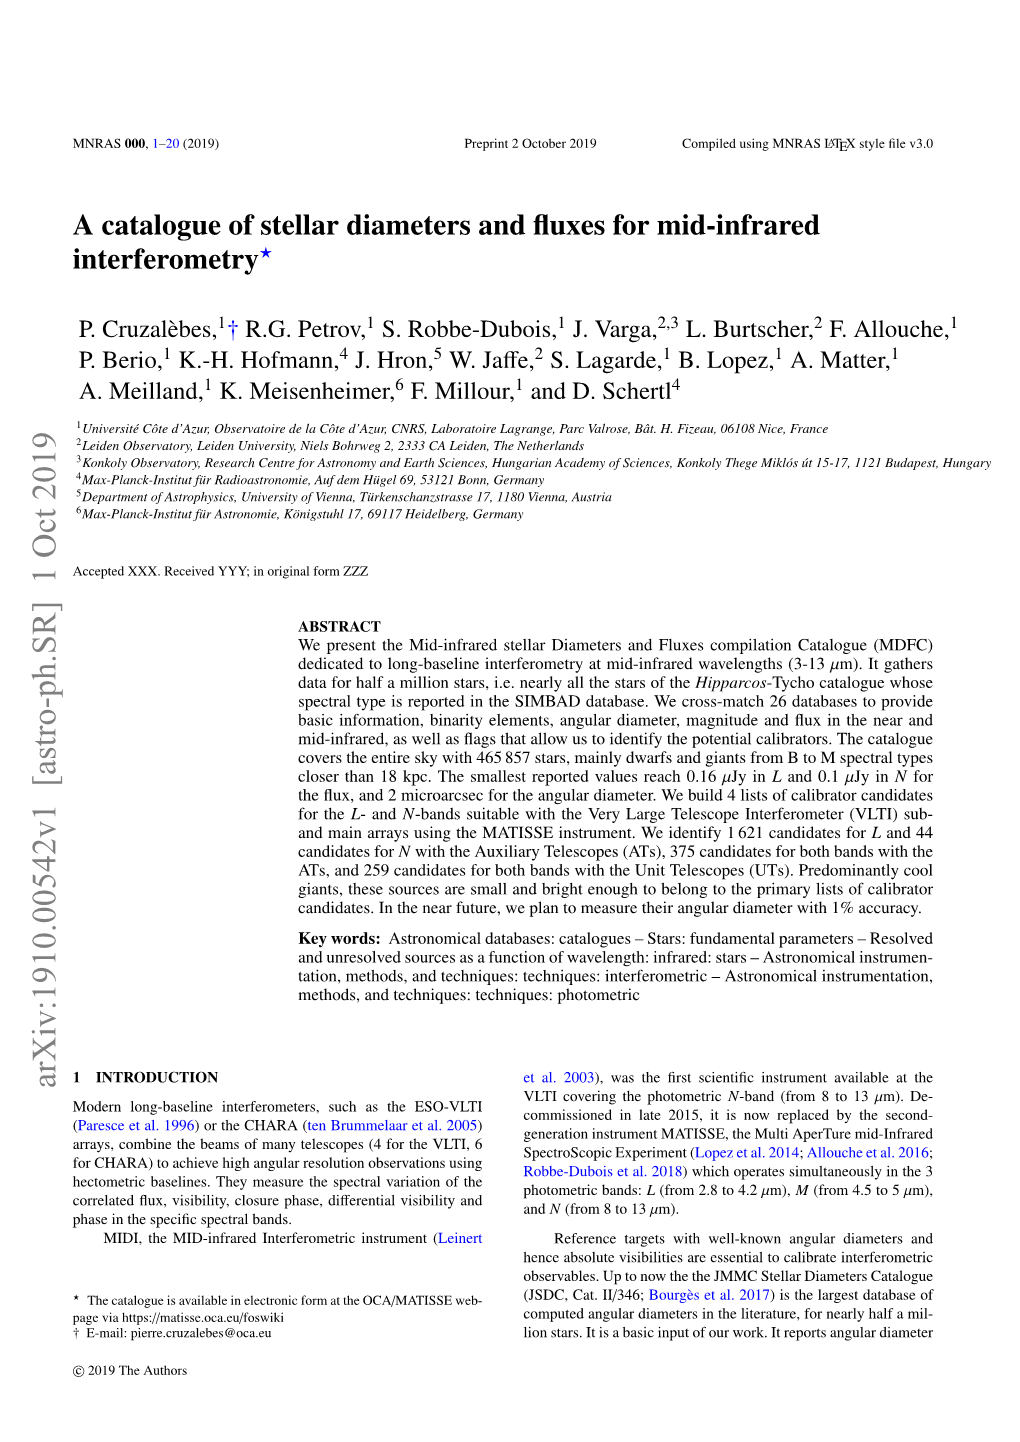 A Catalogue of Stellar Diameters and Fluxes for Mid-Infrared Interferometry